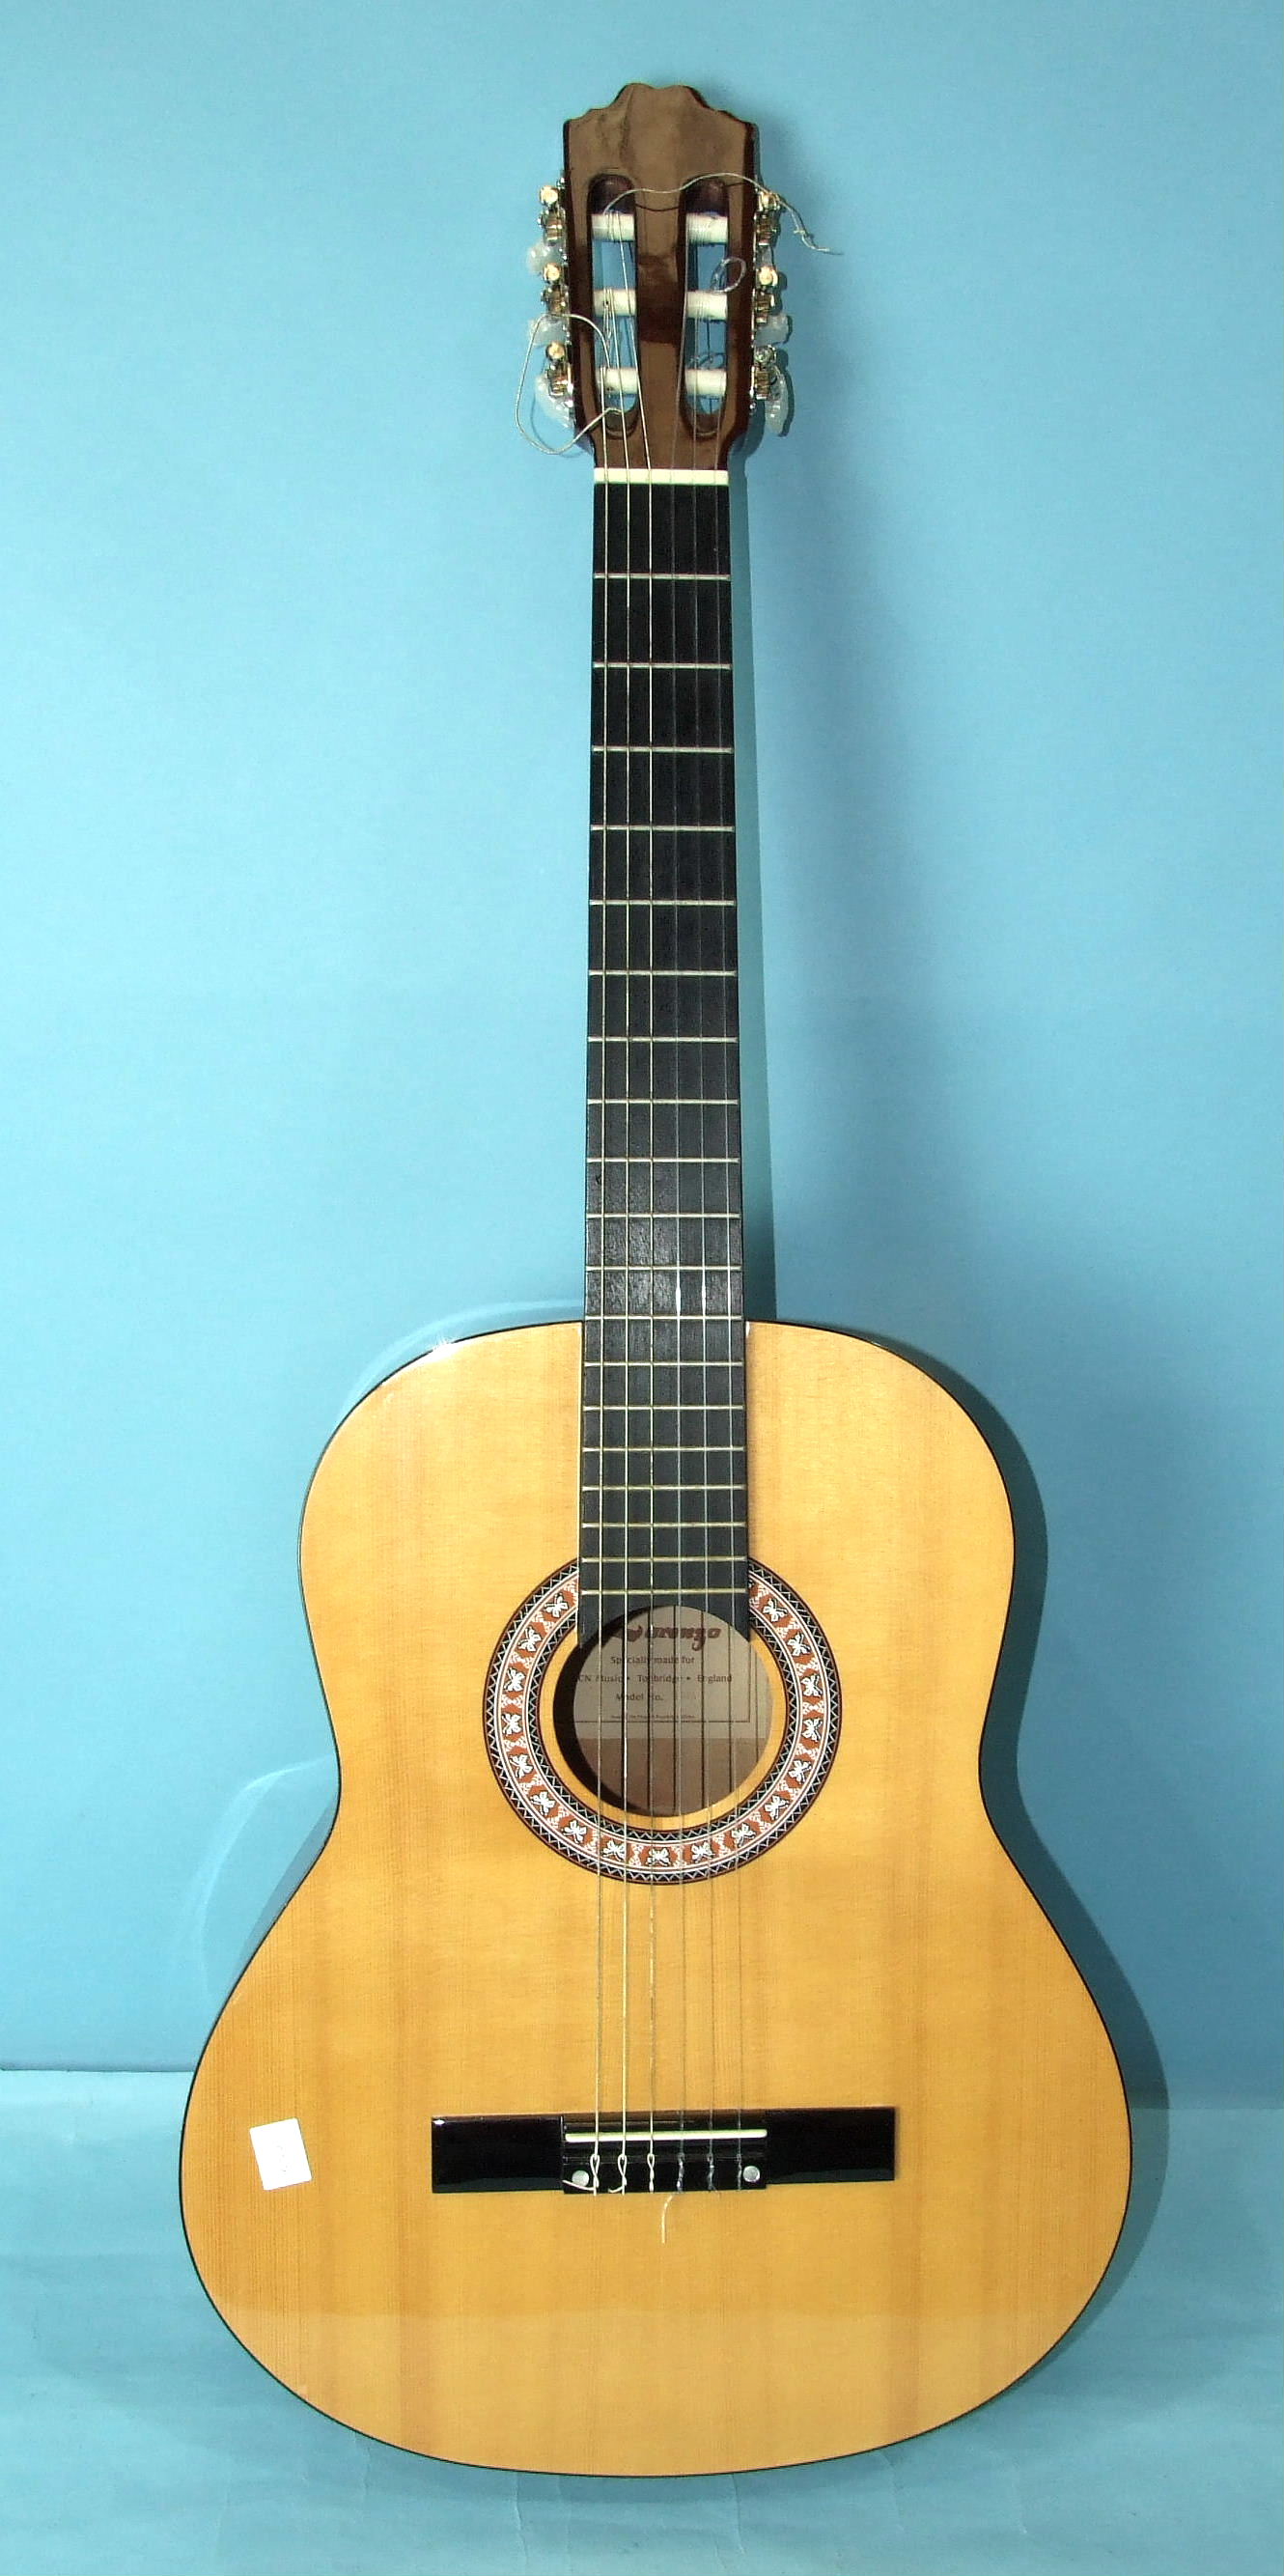 A Lorenzo Model 17/A six-string acoustic guitar in carrying case.